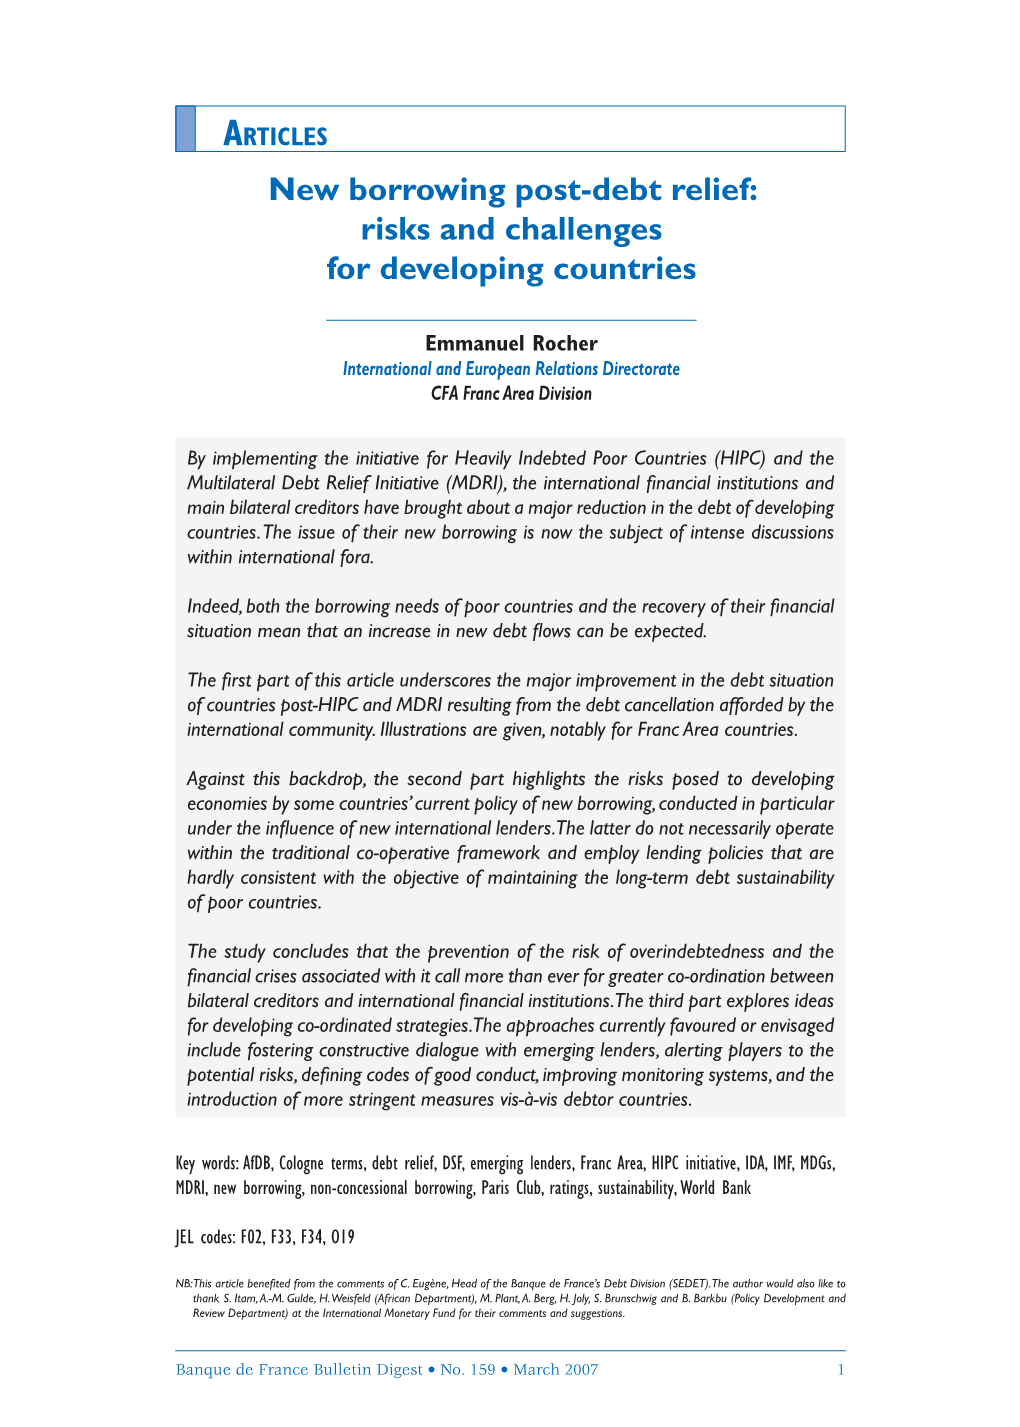 New Borrowing Post-Debt Relief: Risks and Challenges for Developing Countries